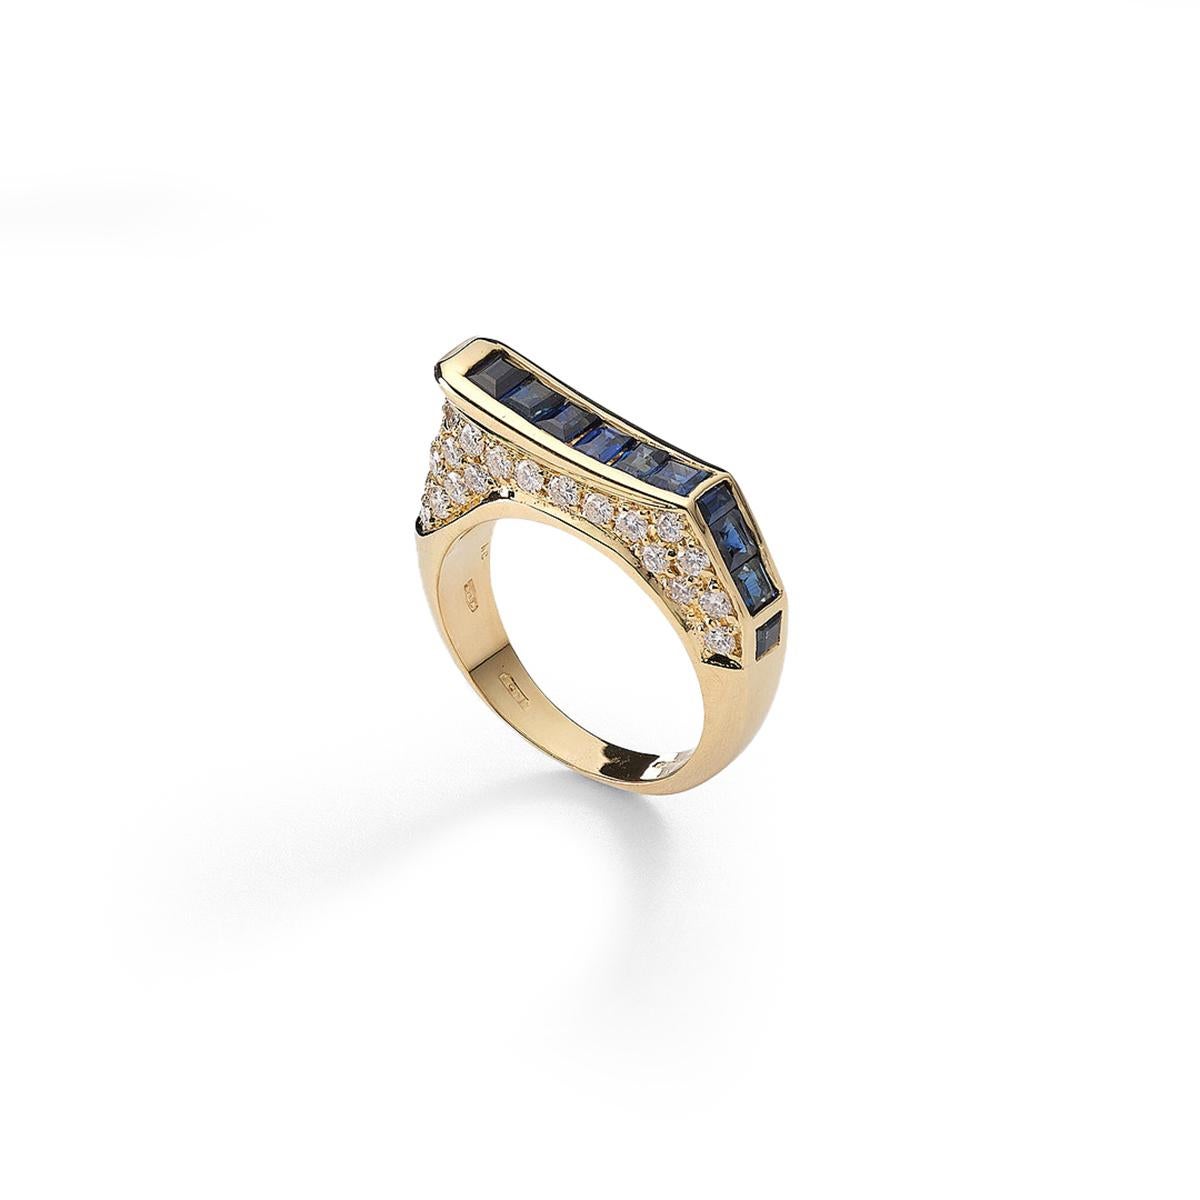 Ring in 18kt yellow gold set with square cut sapphires 1.31 cts and diamonds 1.07 cts Size 52